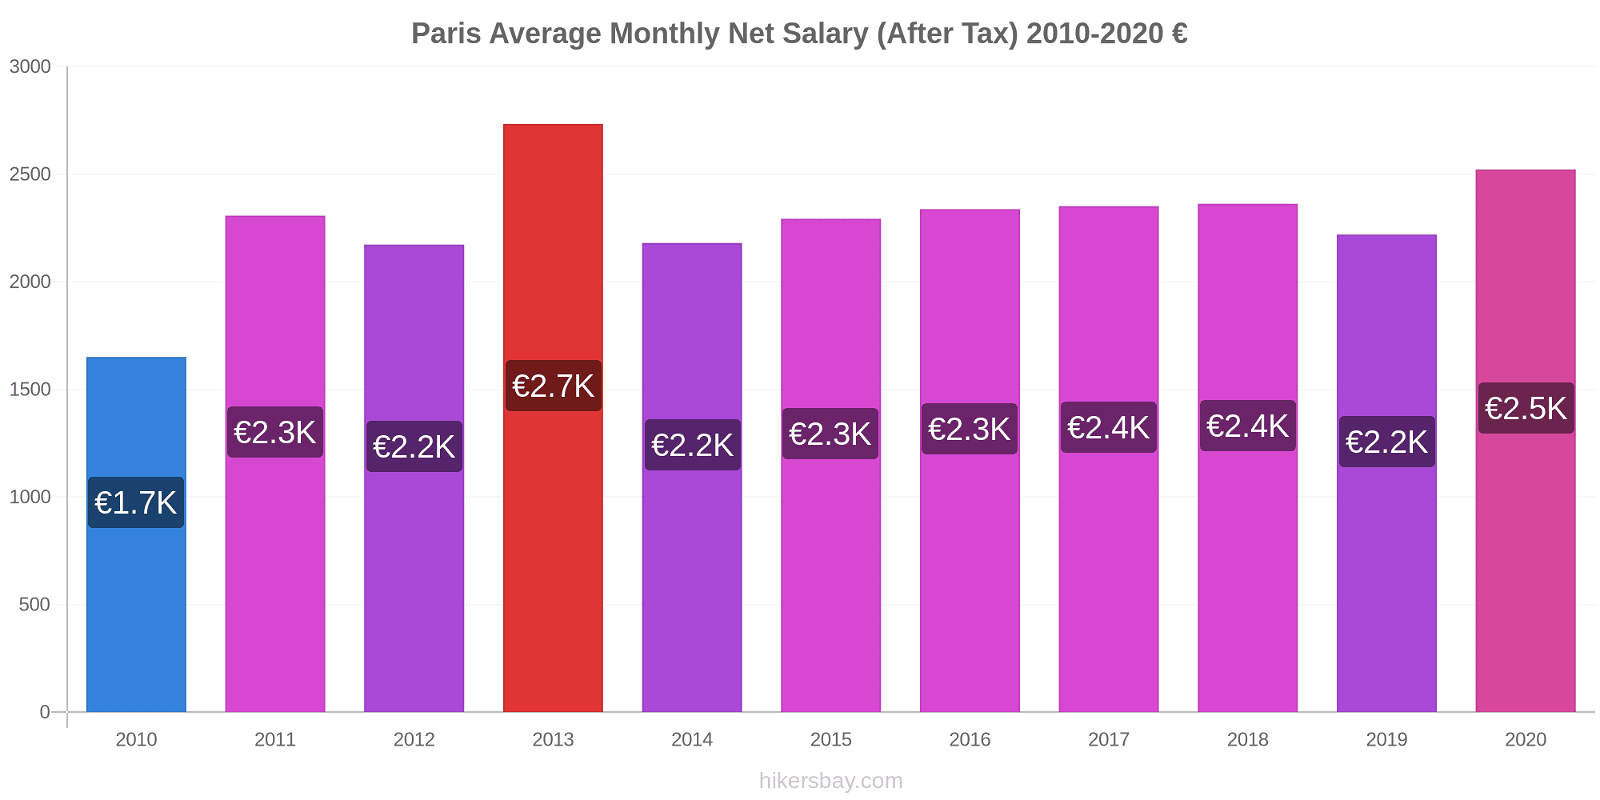 Paris price changes Average Monthly Net Salary (After Tax) hikersbay.com